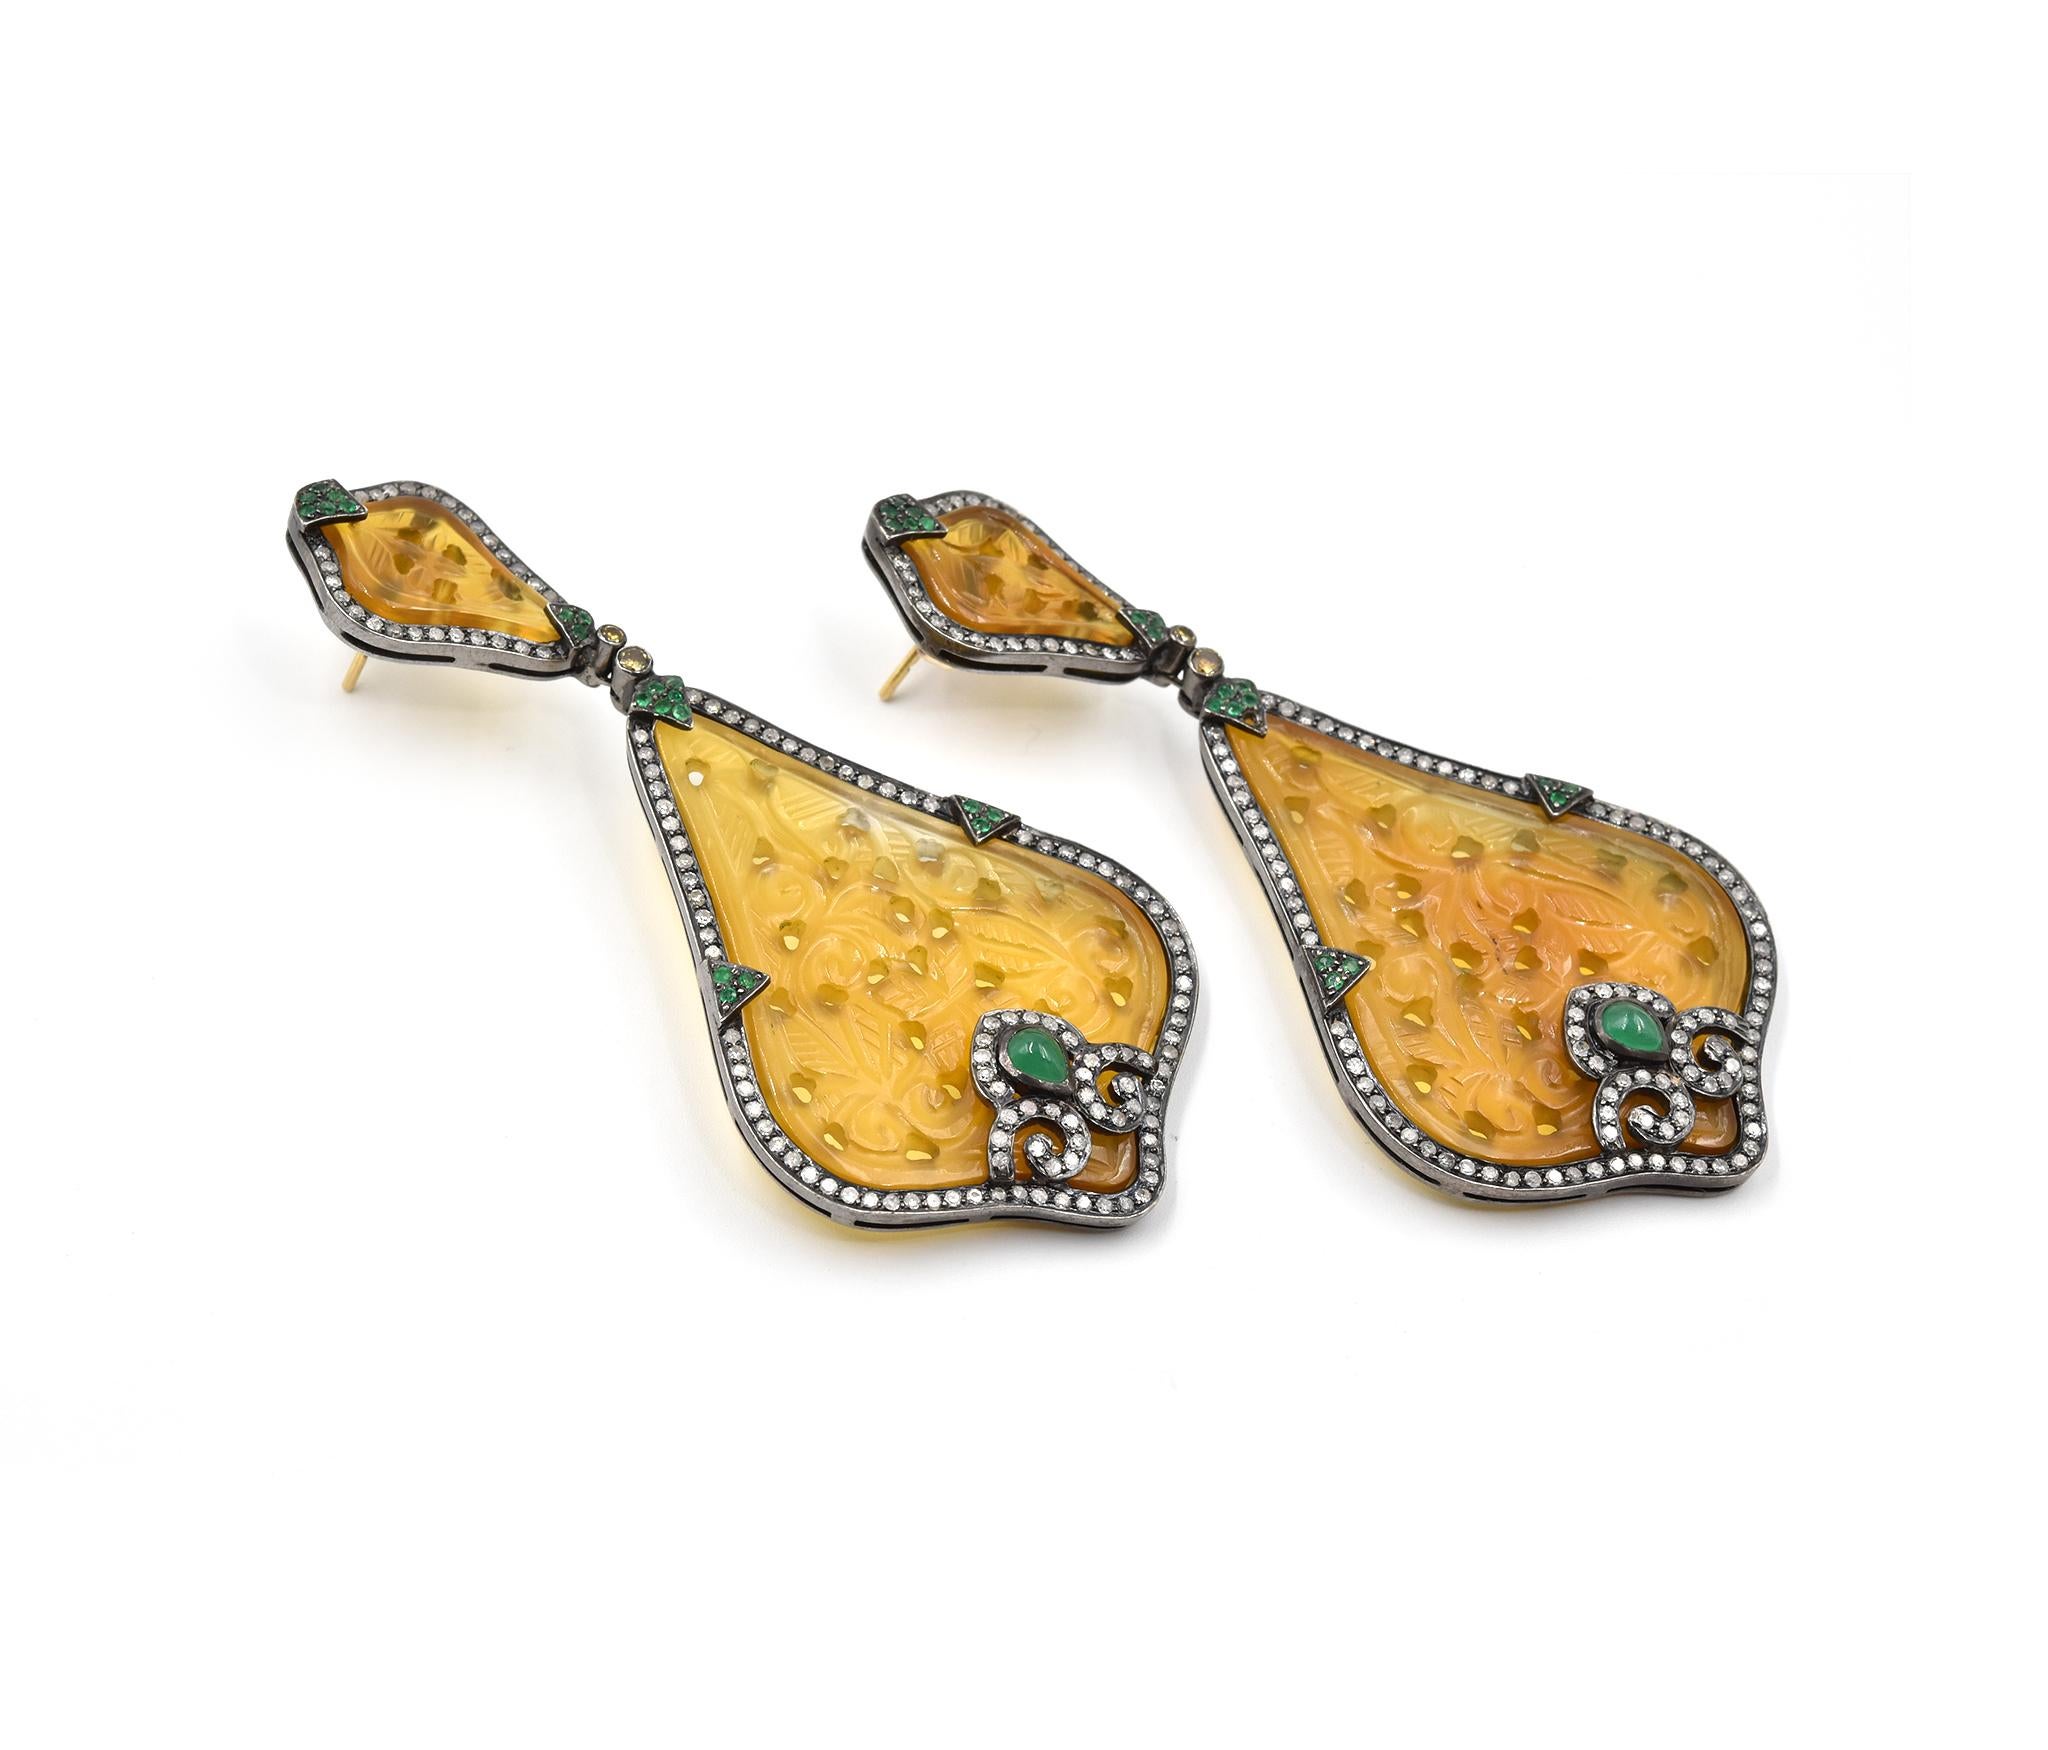 Designer: custom design
Material: 14k yellow gold & sterling silver
Diamonds: 256 round brilliant cut = 1.30 carat weight
Emeralds: 44 round and cabochon cut = 1.52 carat weight
Yellow Jade: pierced and engraved yellow jade
Fastenings: 14k yellow